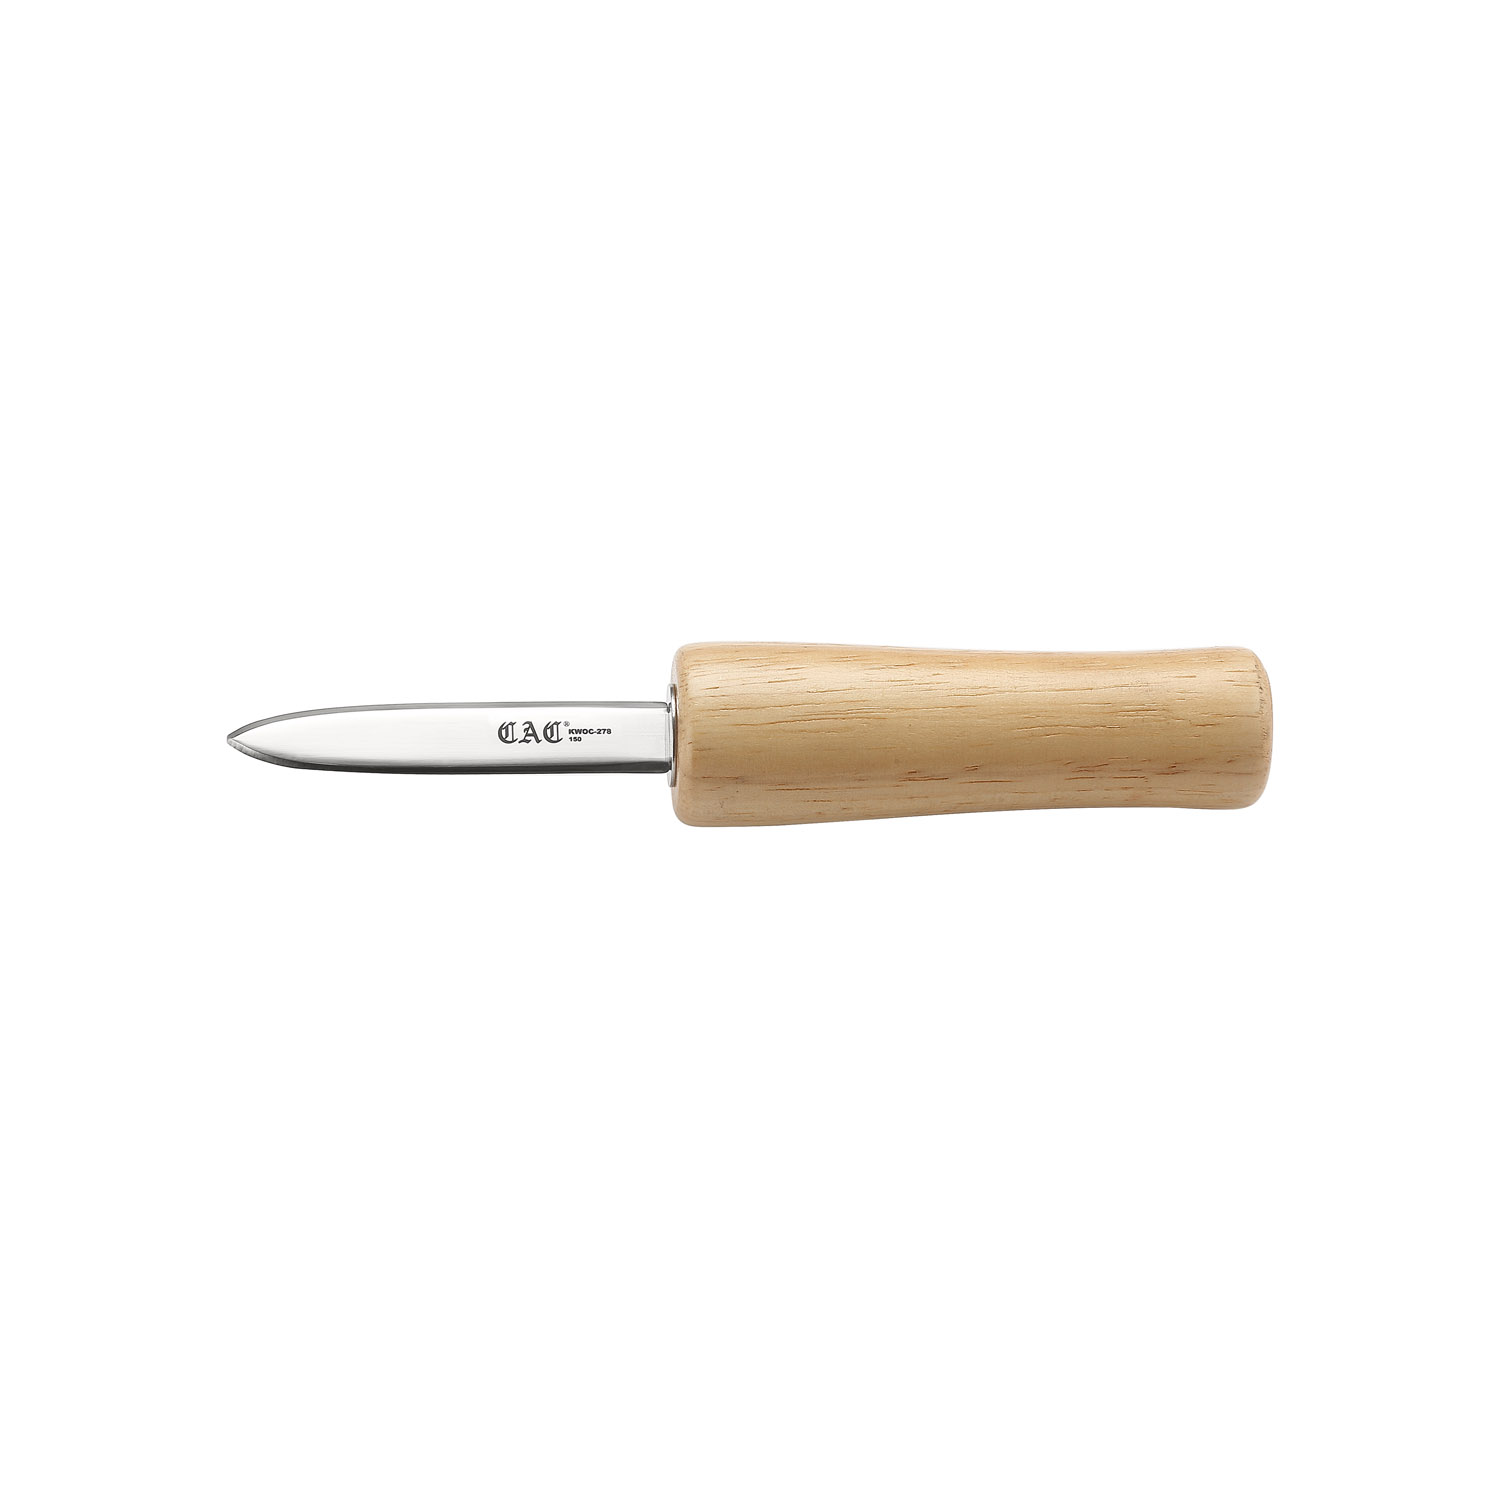 CAC China KWOC-278 Oyster/Clam Knife with Pointed Tip and Wooden Handle 2-7/8"